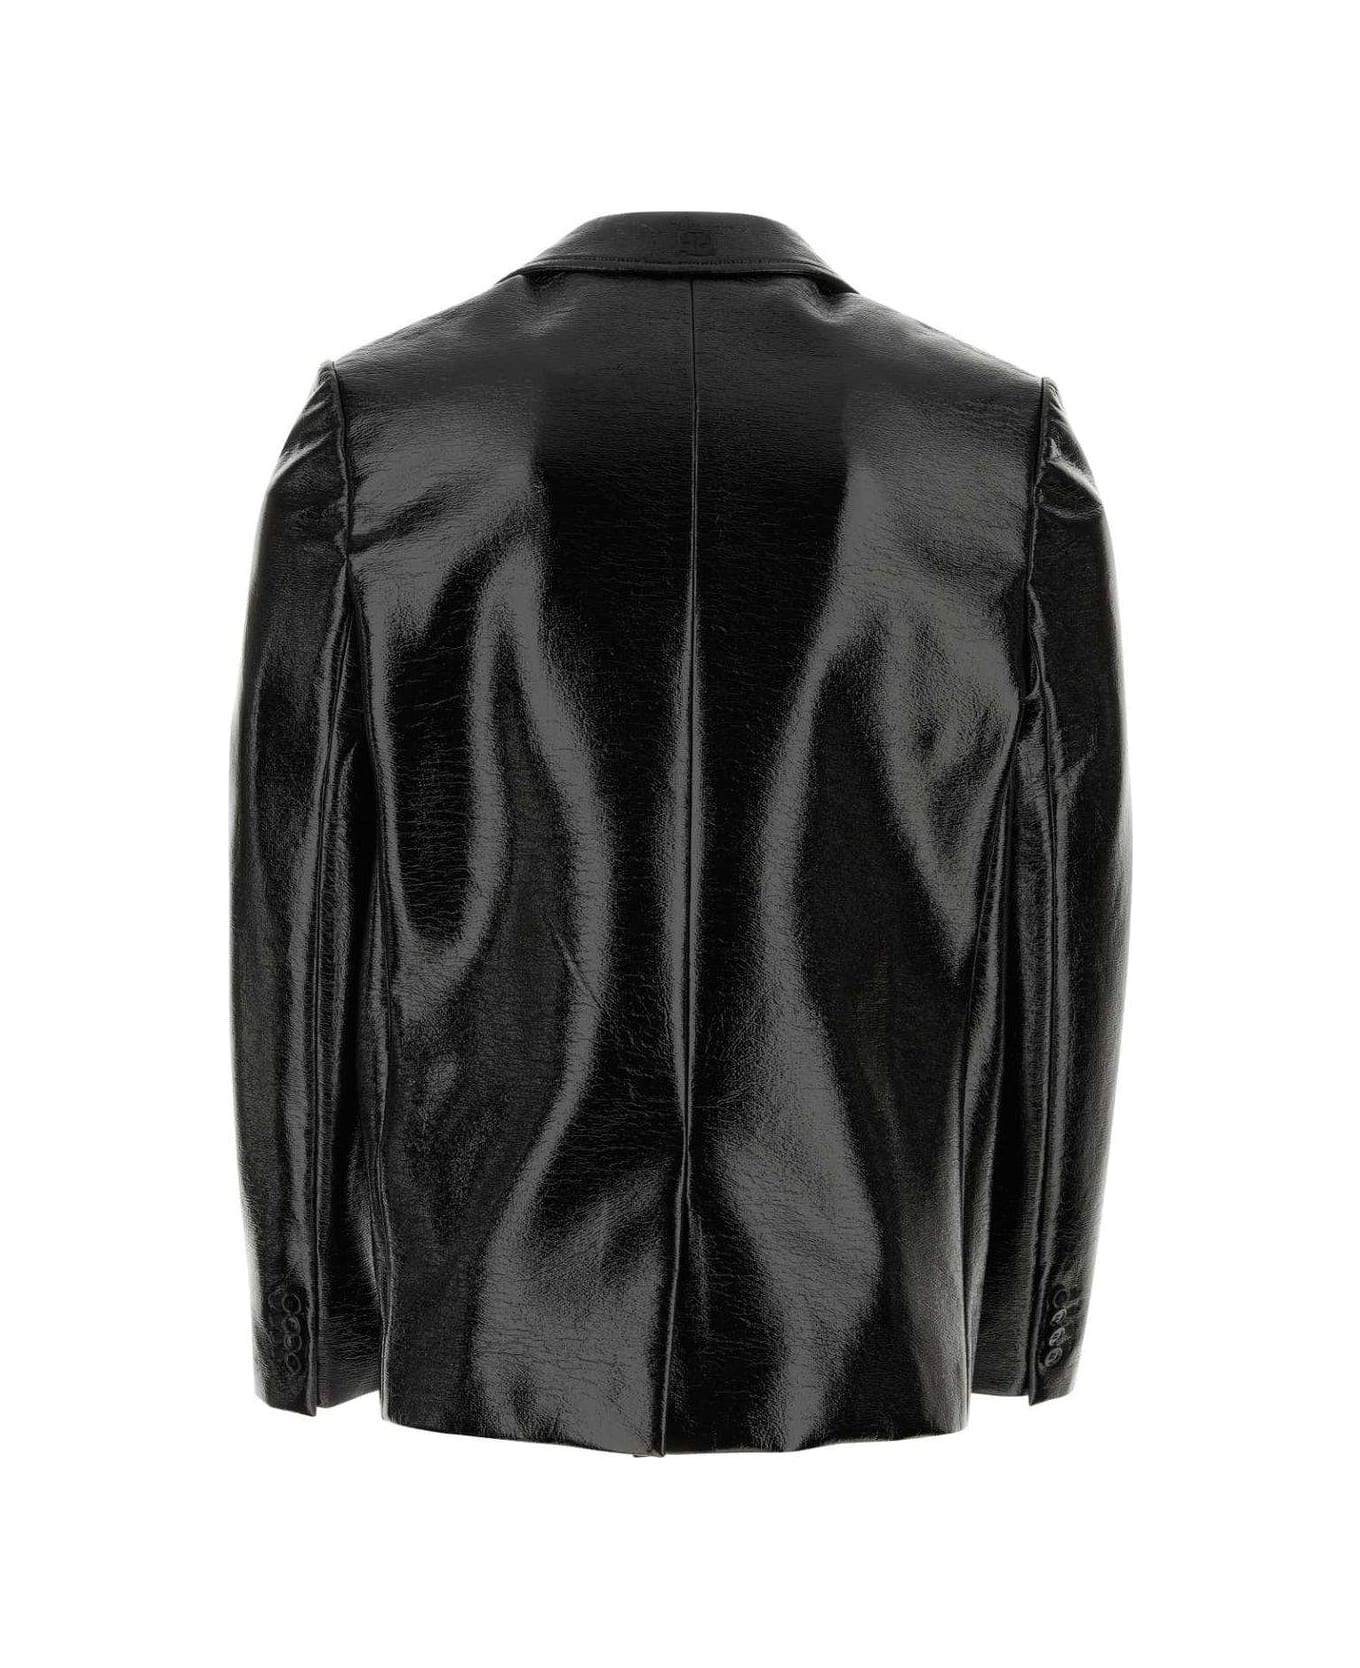 Courrèges Buttoned Leather Jacket - Black ブレザー